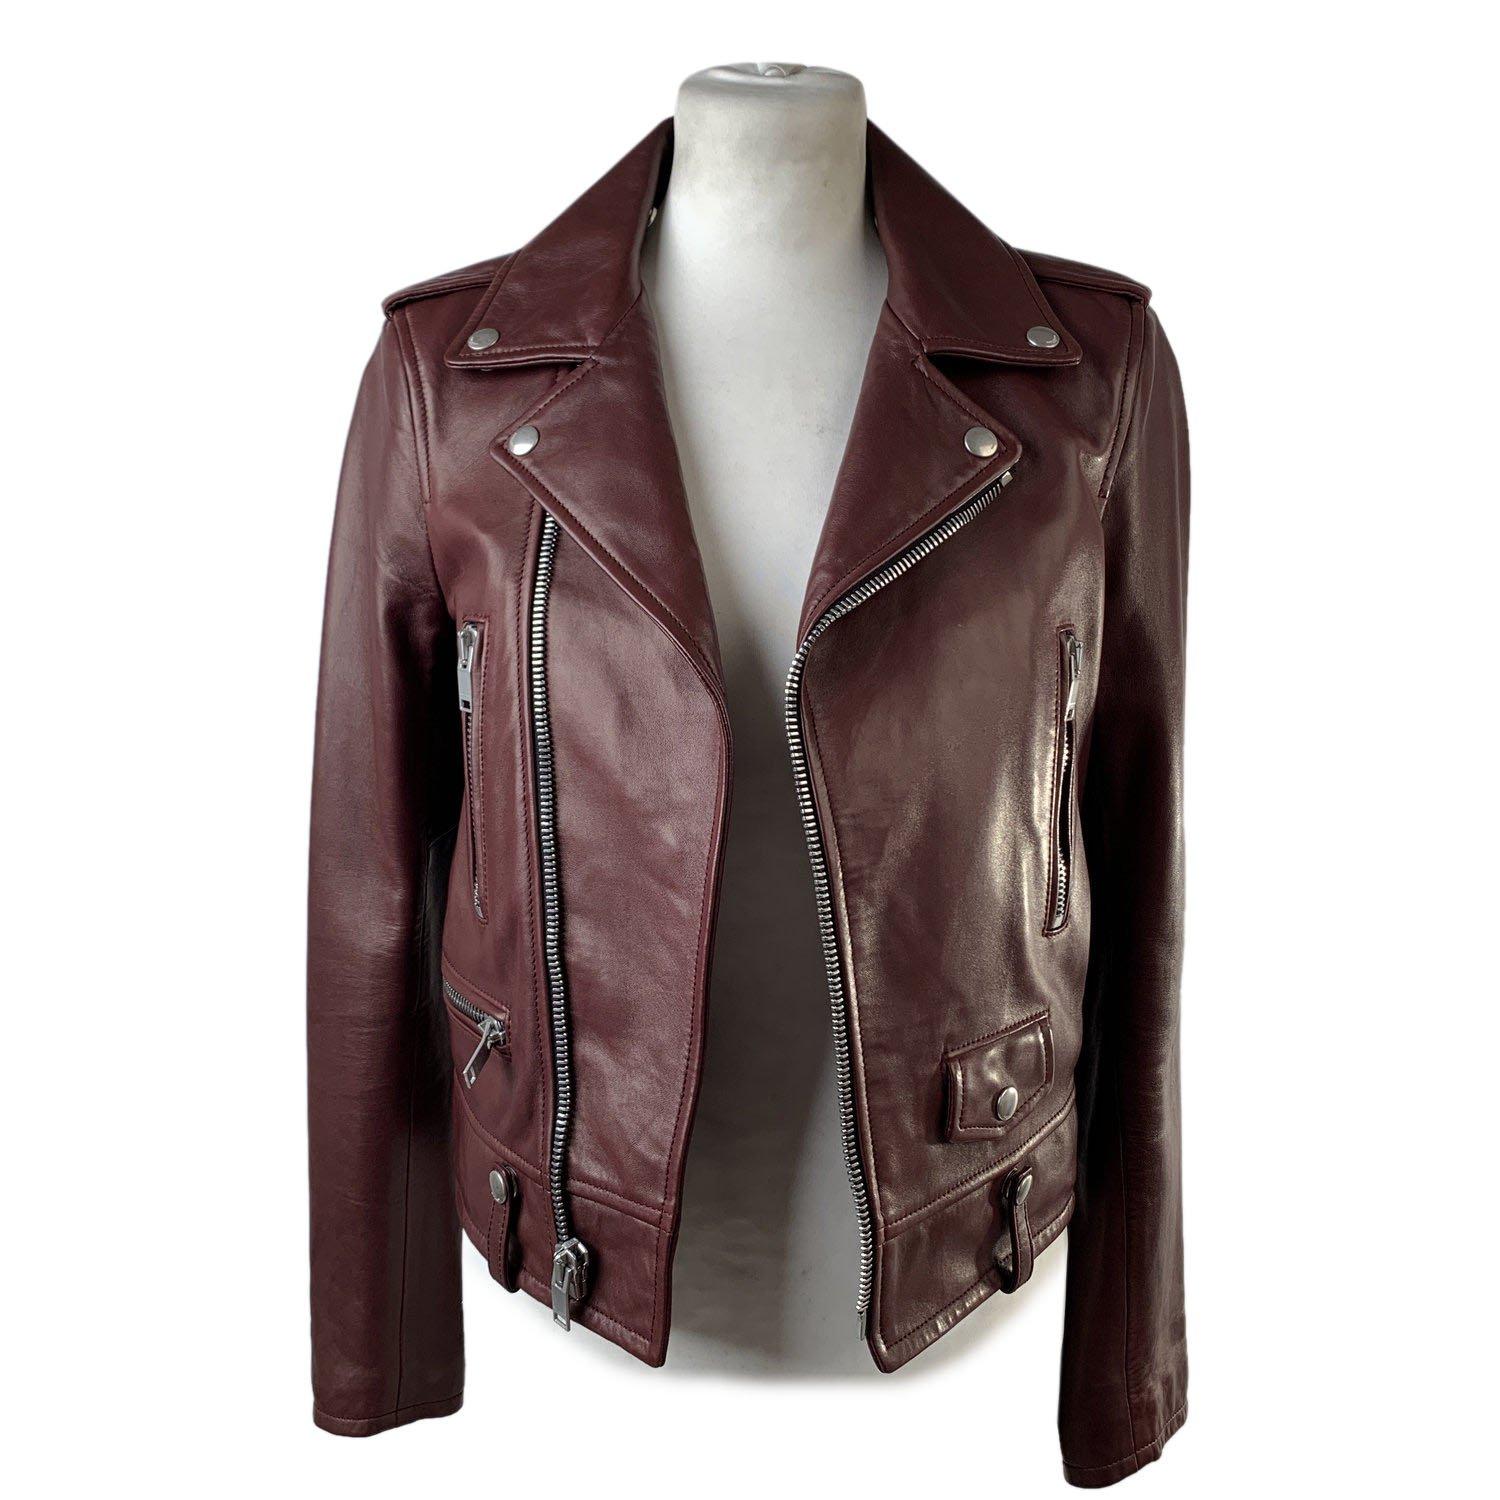 MATERIAL: Leather COLOR: Brown MODEL: Jacket GENDER: Women SIZE: Small Condition A :EXCELLENT CONDITION - Used once or twice. Looks mint. Imperceptible signs of wear - Some normal wear of use on leather Measurements SHOULDER TO SHOULDER: 15 inches -